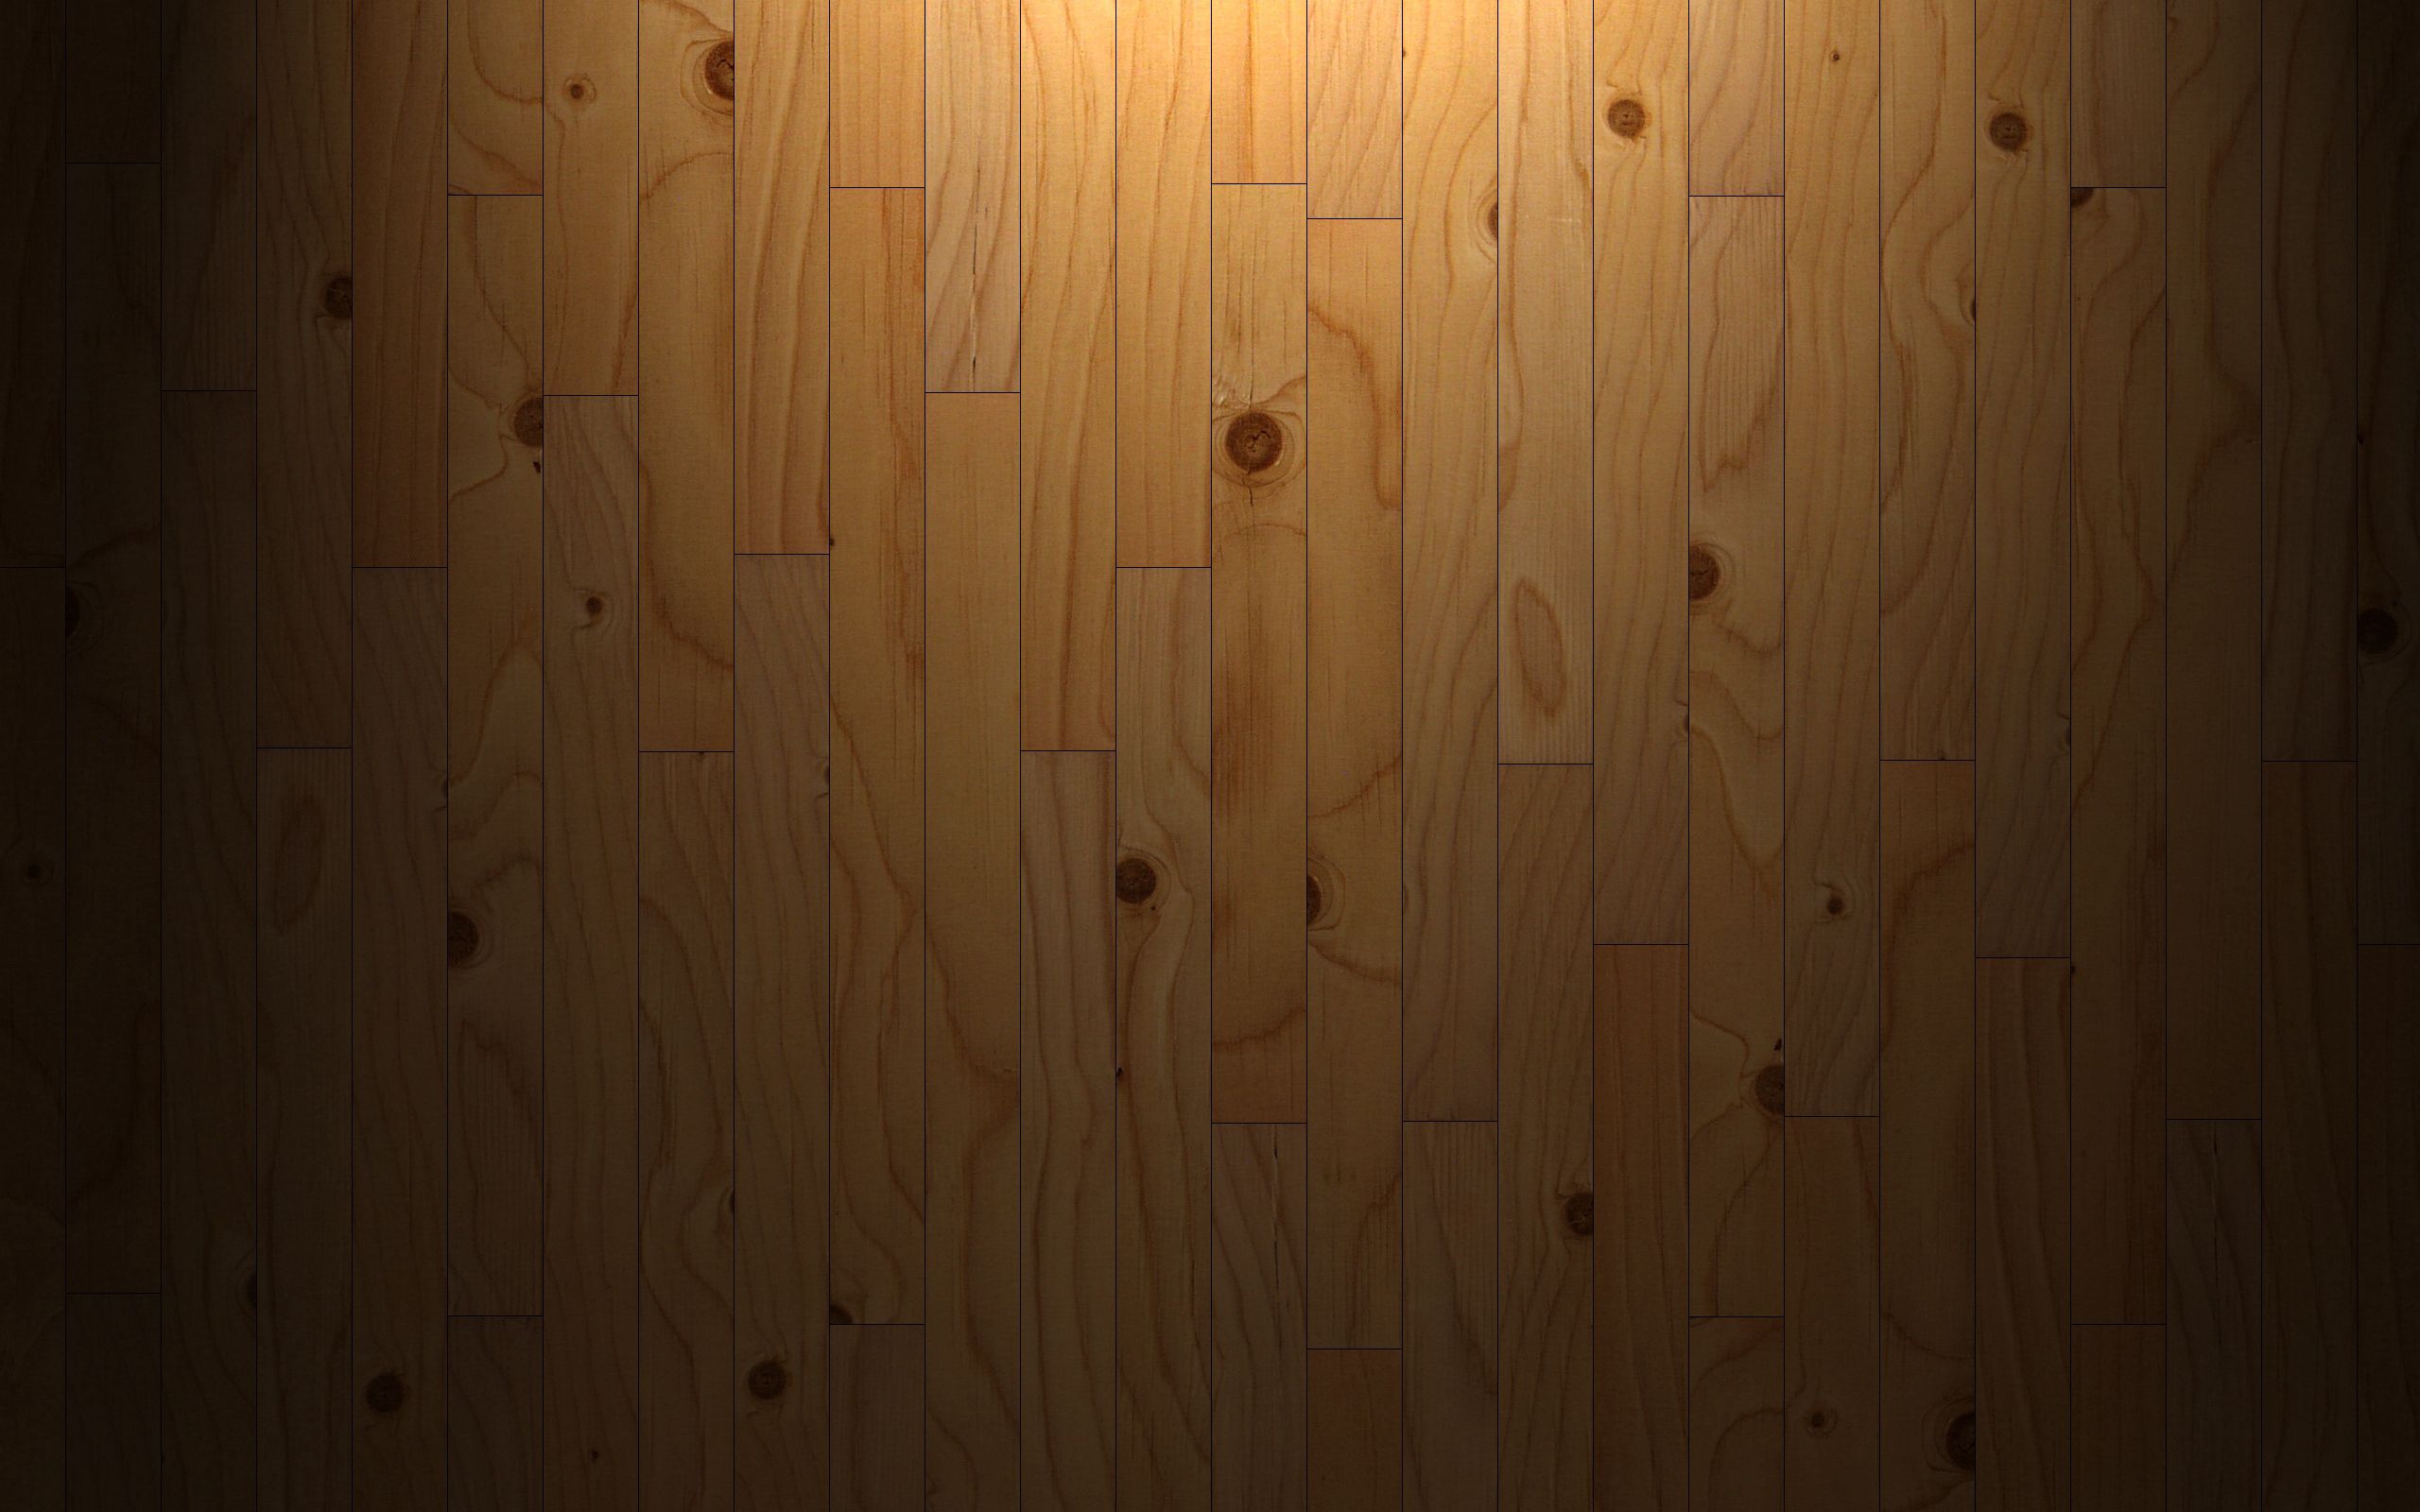 wood, streaks, board, textures, stripes, texture, tree, planks, parquet wallpapers for tablet